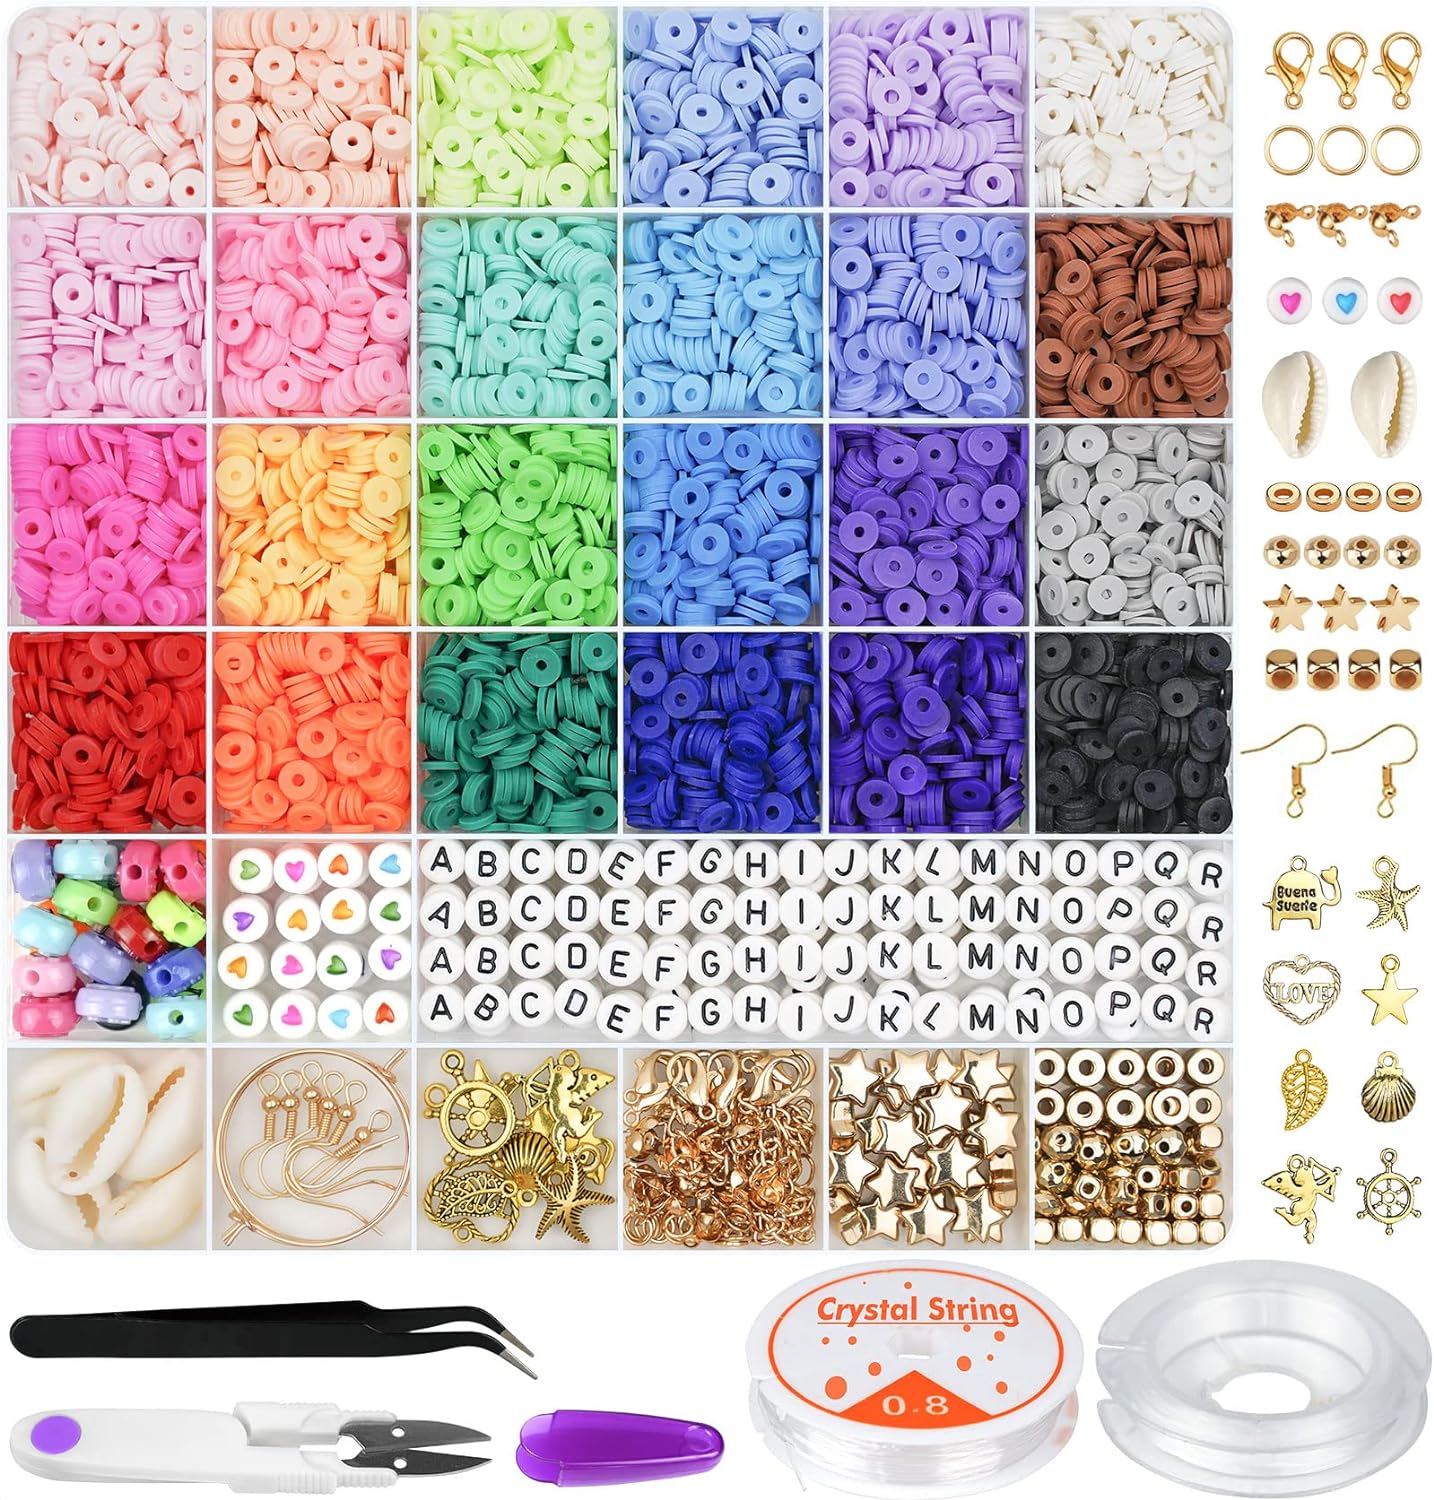 6000 Pcs Clay Beads for Bracelet Making, 24 Colors Flat Preppy Beads for  Friendship Bracelet Kit, Polymer Clay Heishi Beads with Charms for Jewelry  Making, Crafts Gifts for Teen Girls，A05 